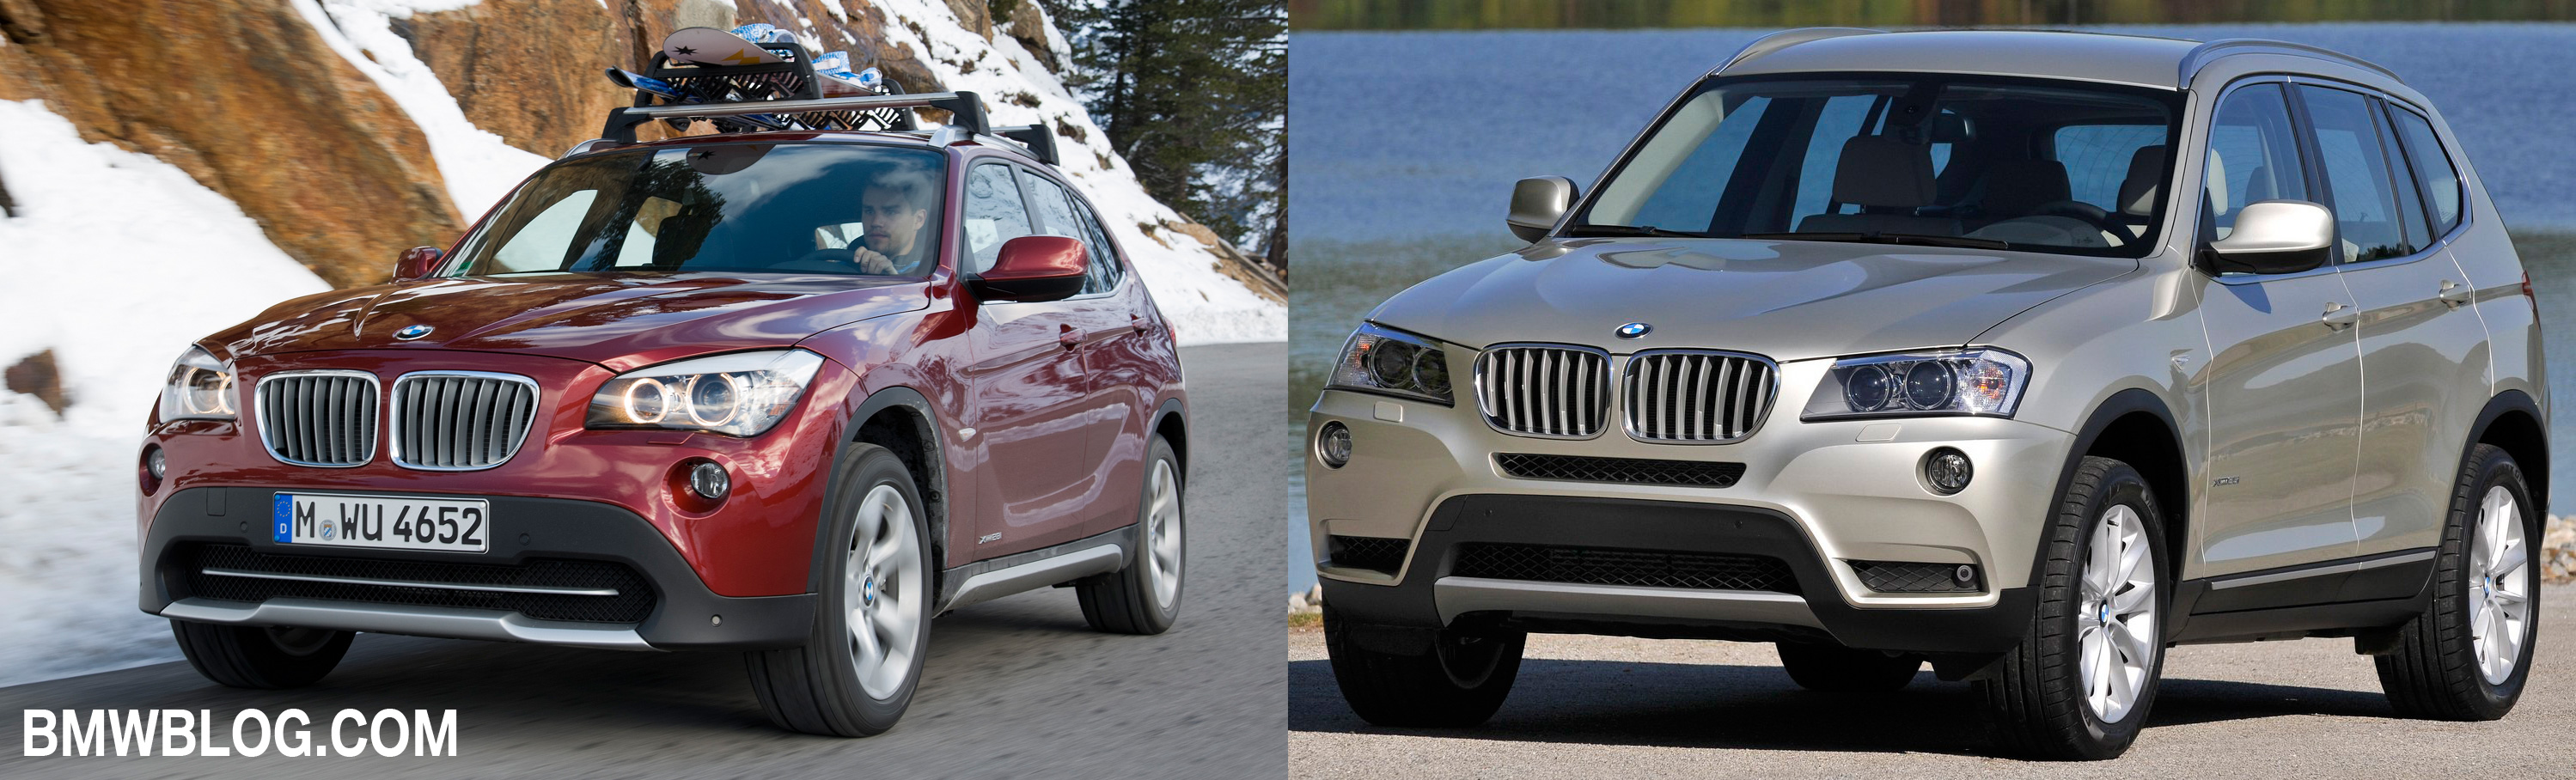 Whats better bmw x5 or x3 #2